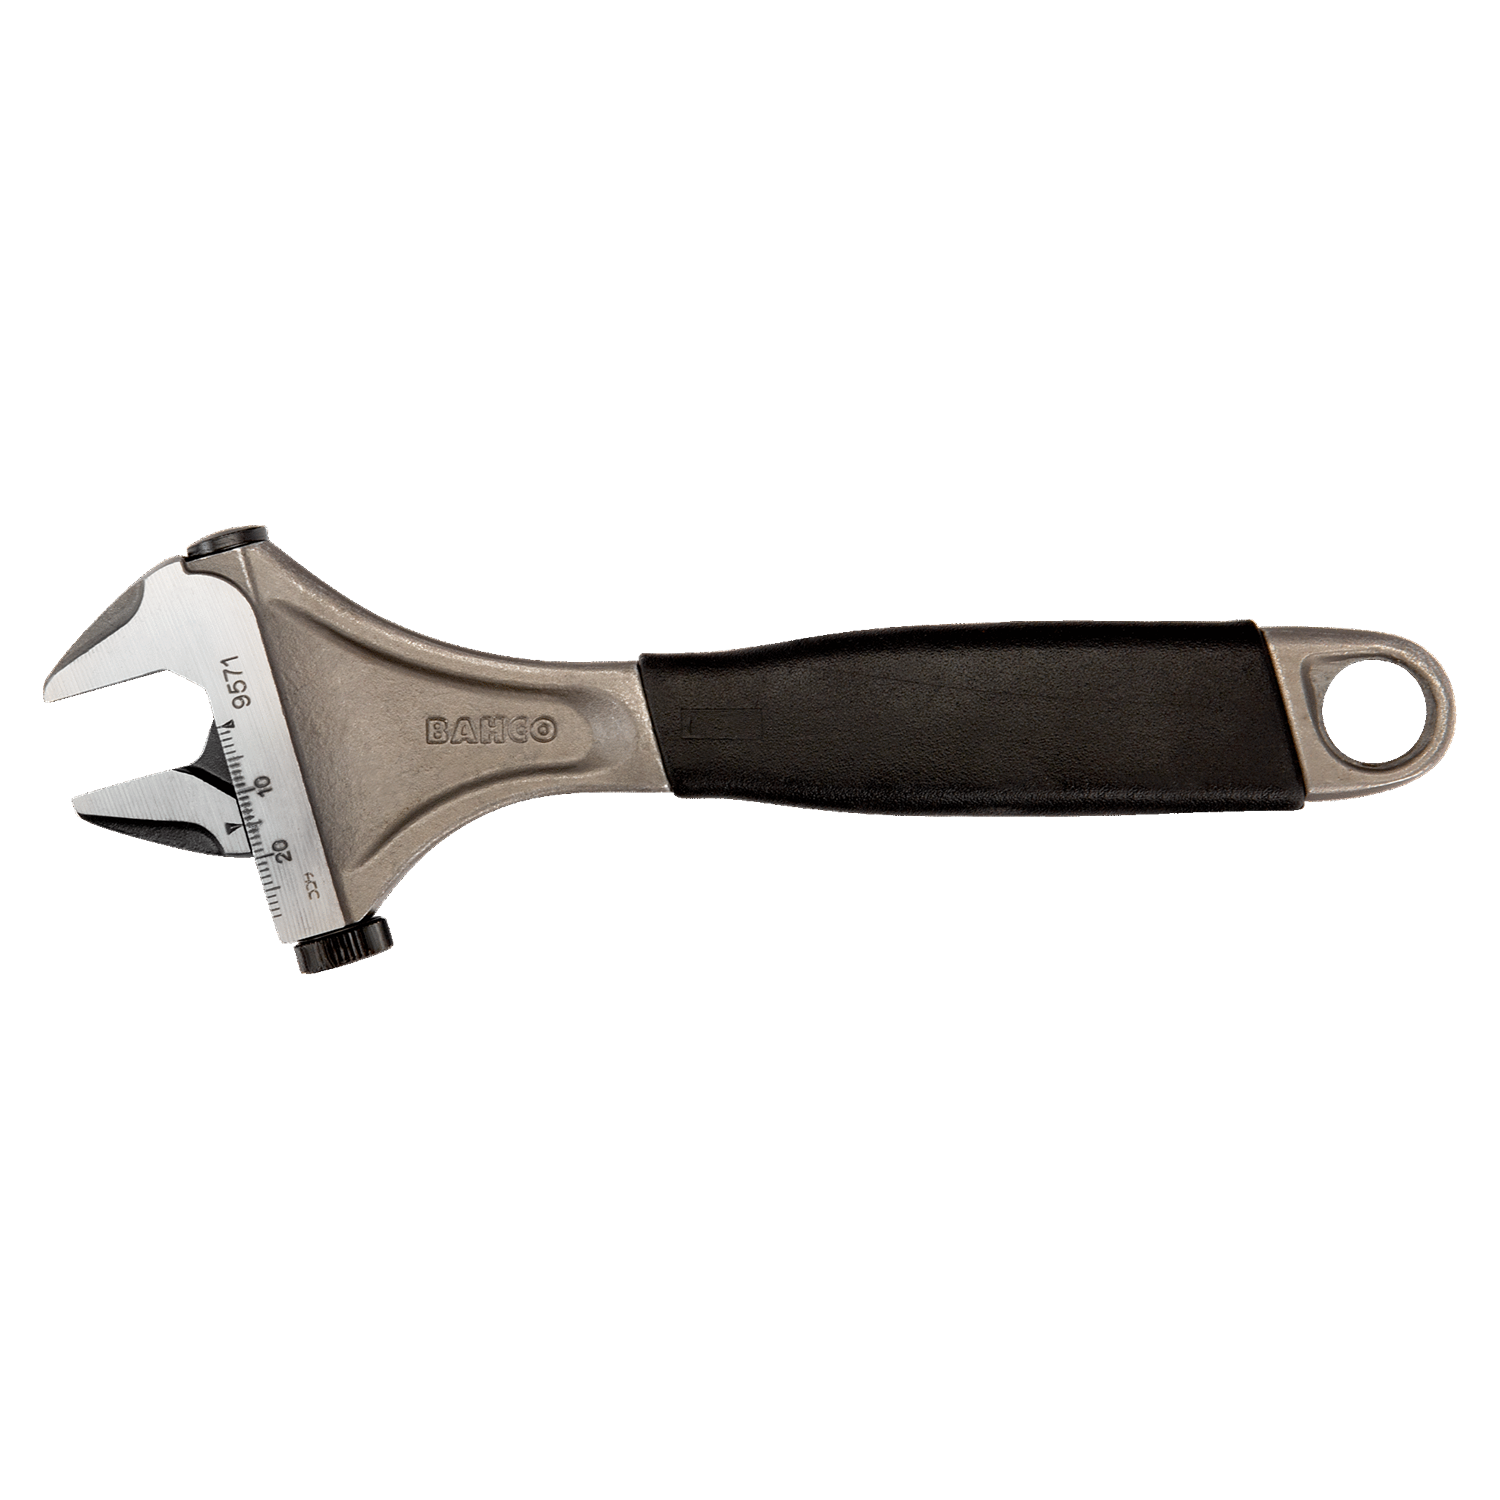 BAHCO 95 Side Nut Heavy Duty Adjustable Wrench - Premium Adjustable Wrench from BAHCO - Shop now at Yew Aik.